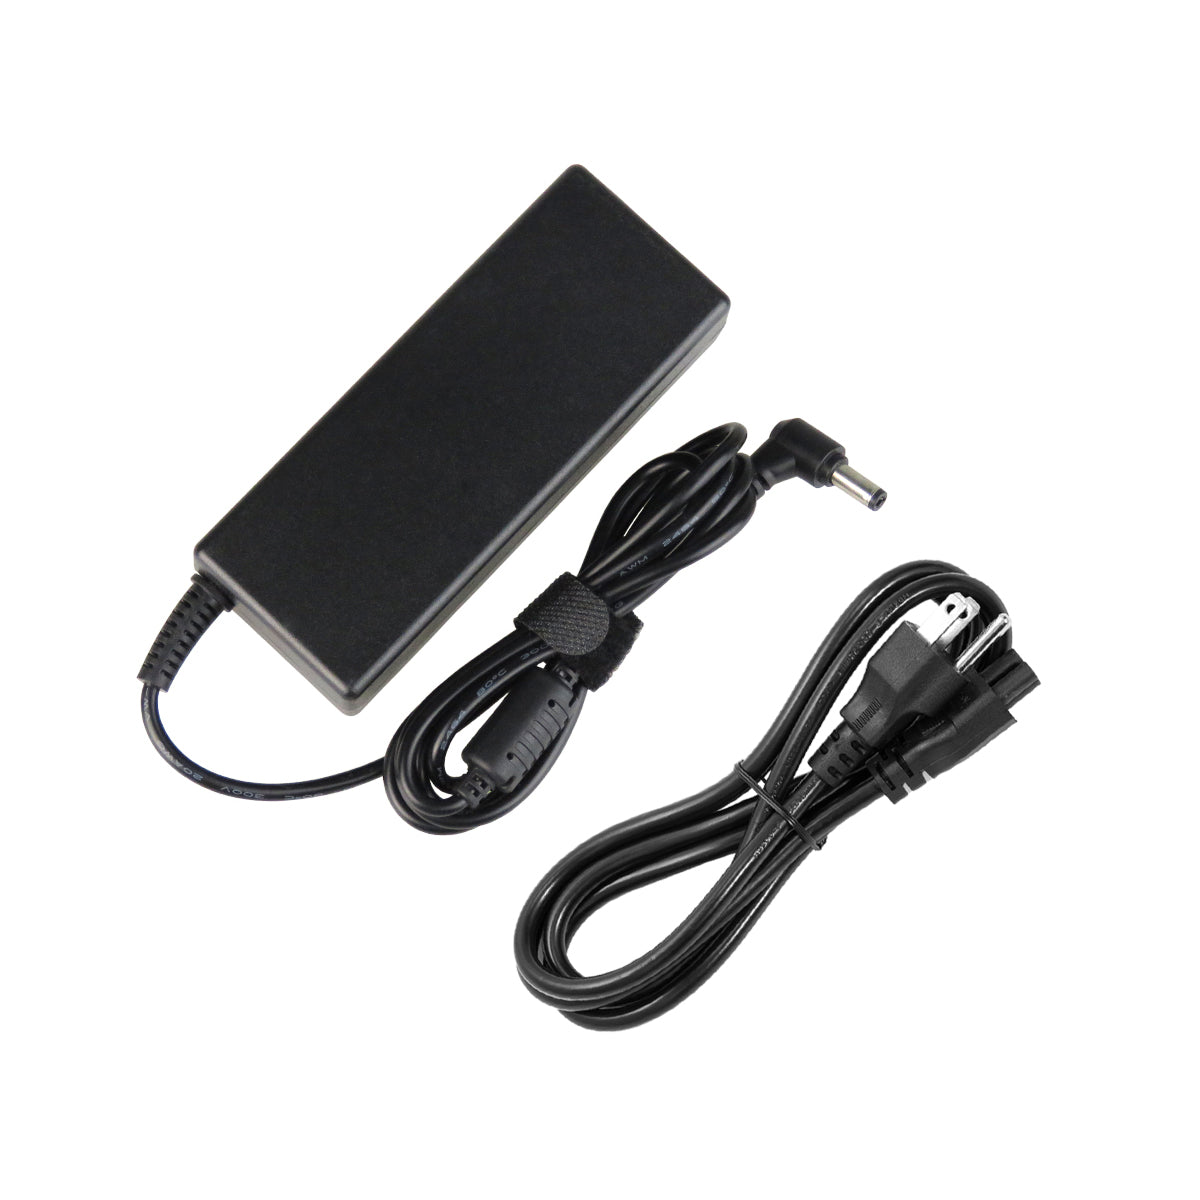 AC Adapter Charger for ASUS G53JW Notebook.